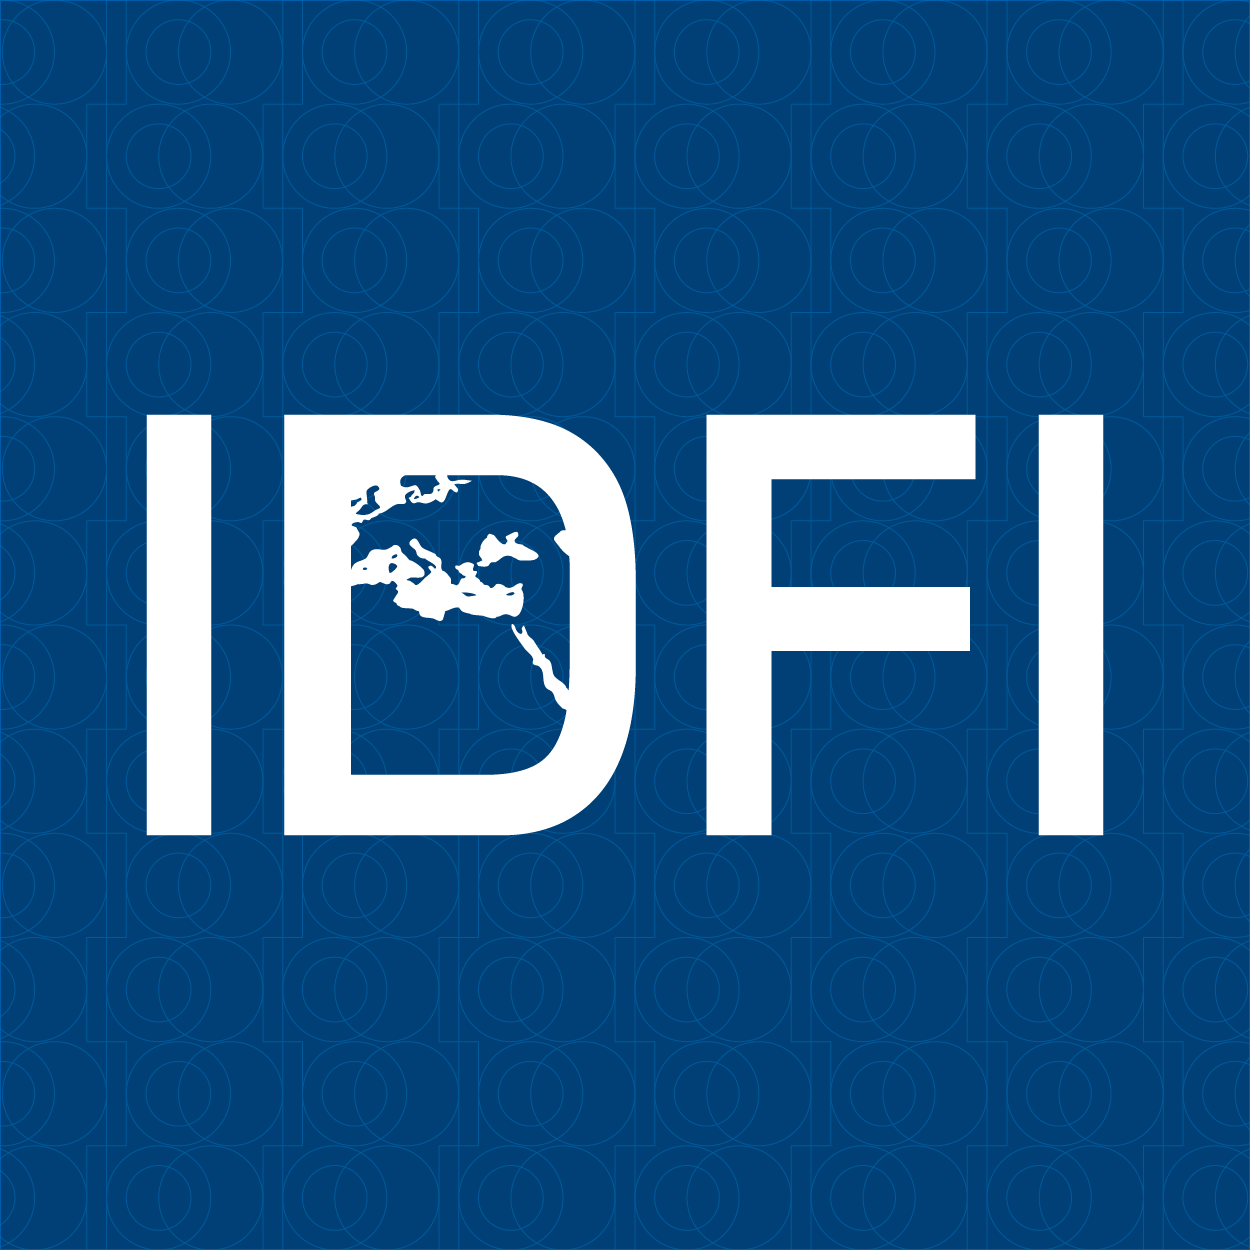 IDFI Delivered a Statement at the Pre-Session of the UN Universal Periodic Review 